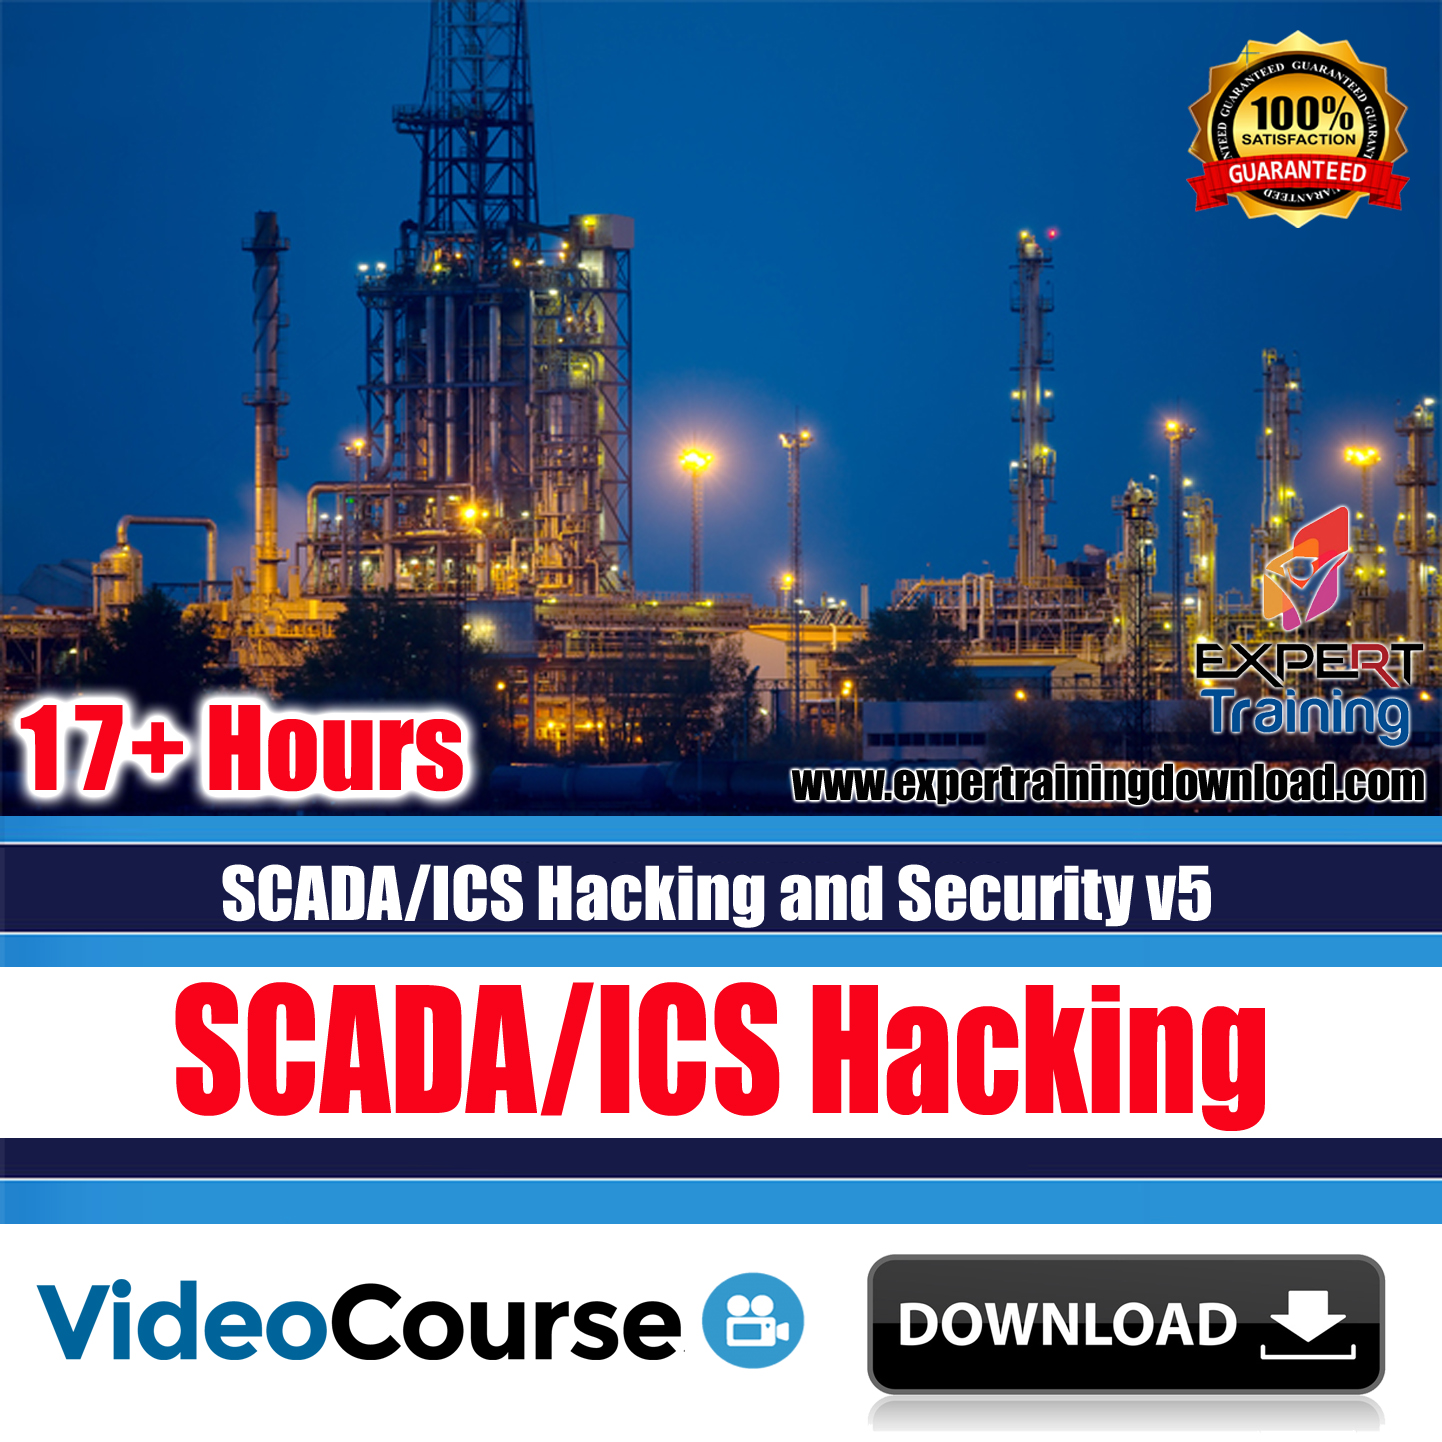 SCADA/ICS Hacking and Security v5